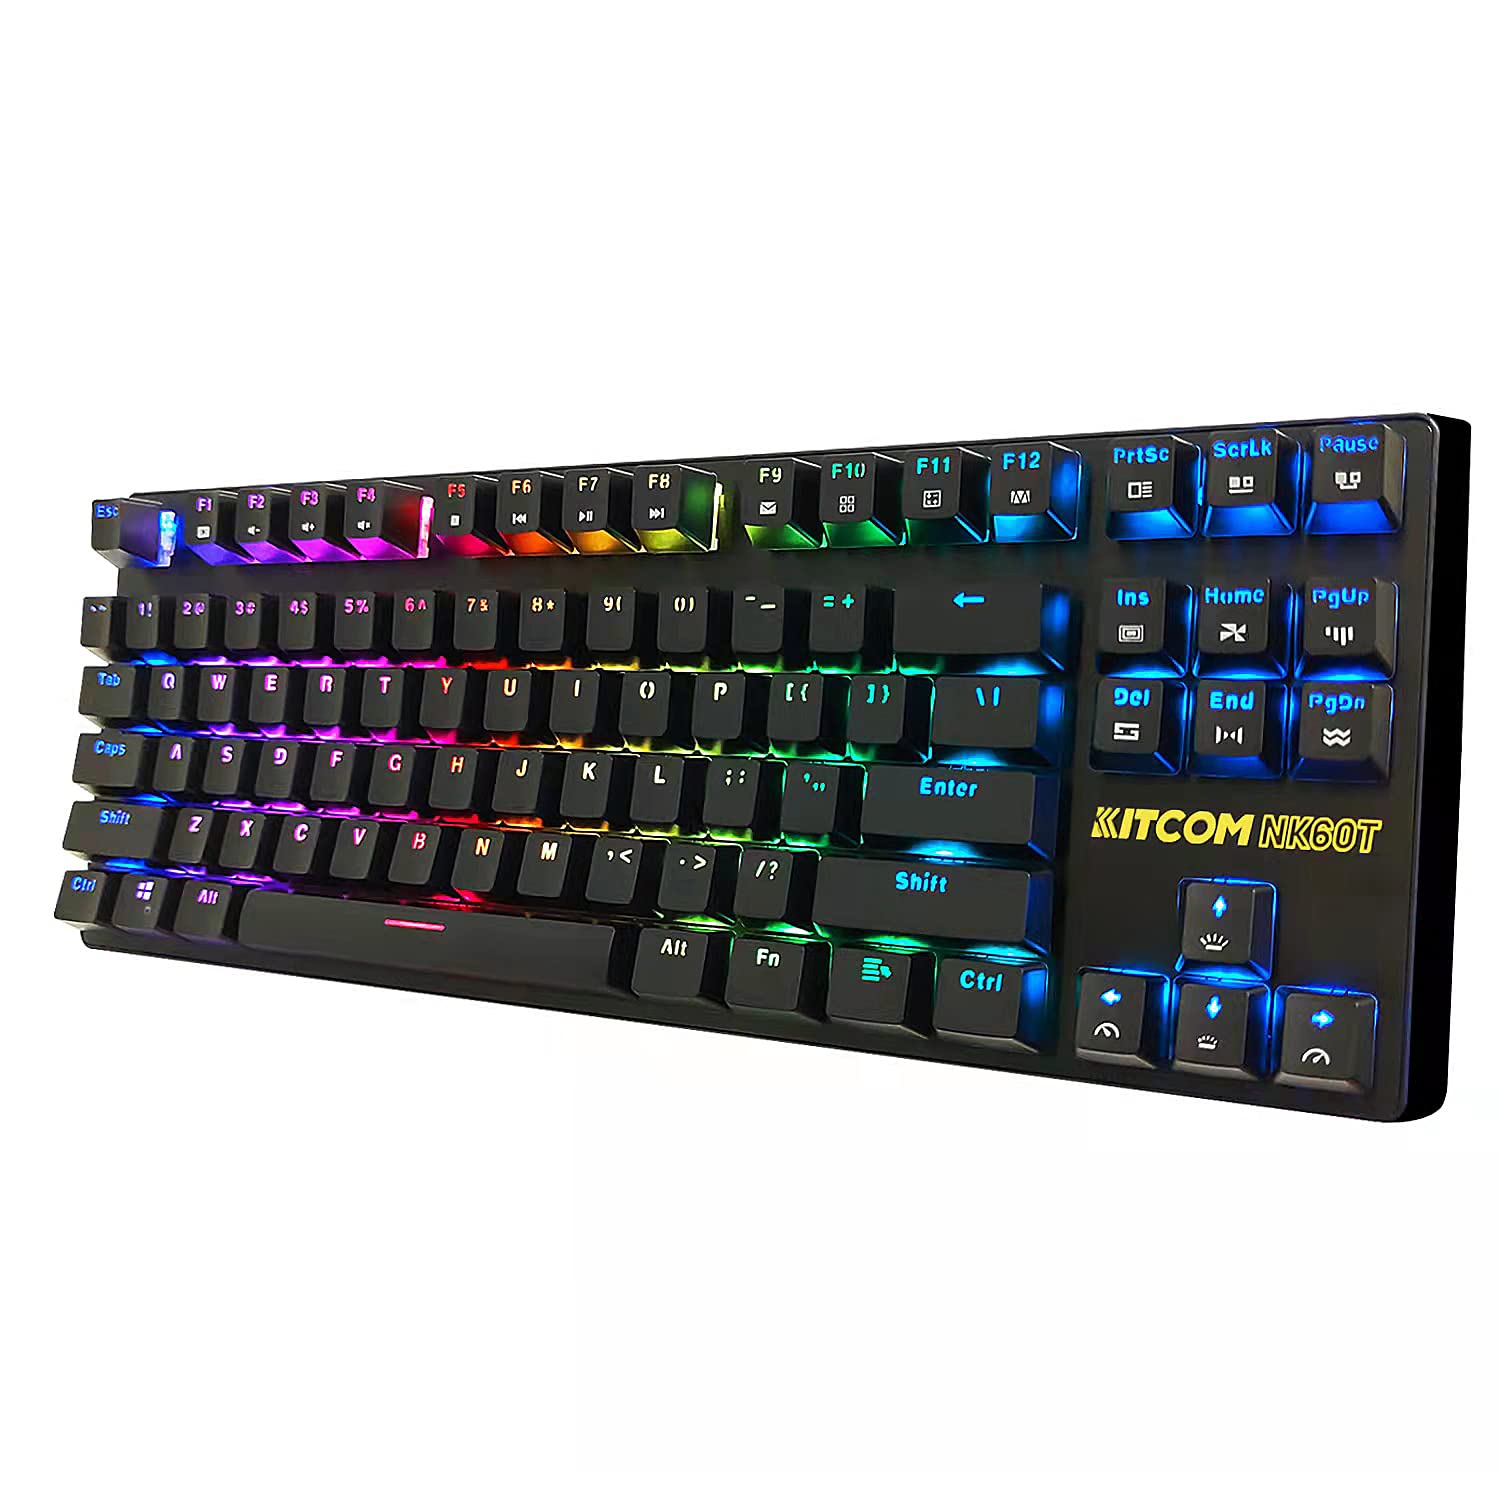 Gaming Keyboard Mechanical 87 Key Silent Red Switch, KITCOM TKL RGB NKRO Backlit Per Key Double-Shot ABS keycaps Programmable Macro Detachable Type-C Quiet Wired Keyboard for Windows Laptop PC NK60T